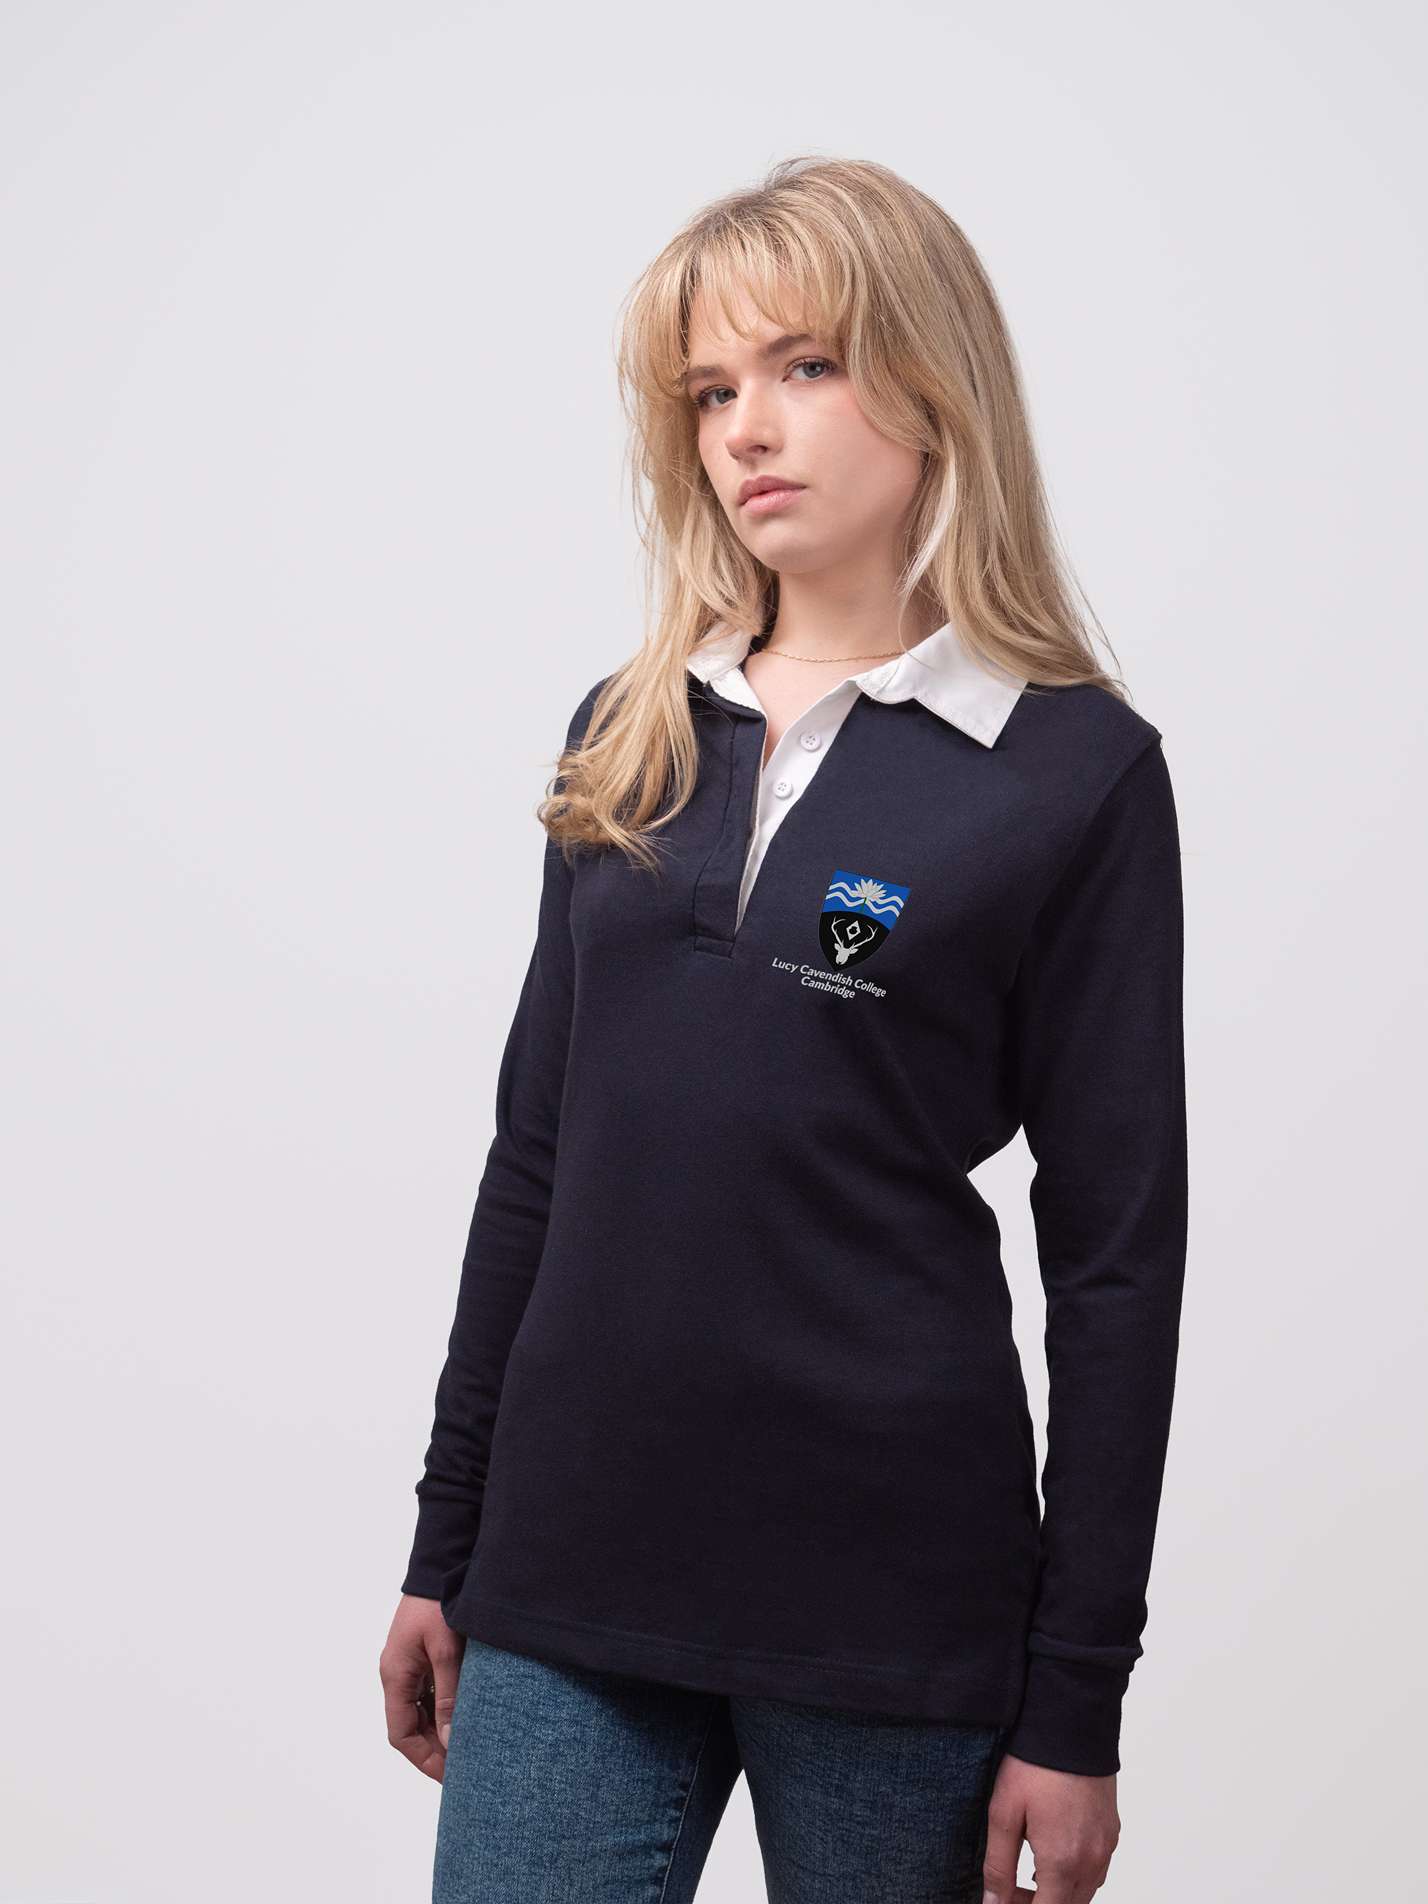 Student wearing a navy Lucy Cavendish College rugby shirt with embroidered crest